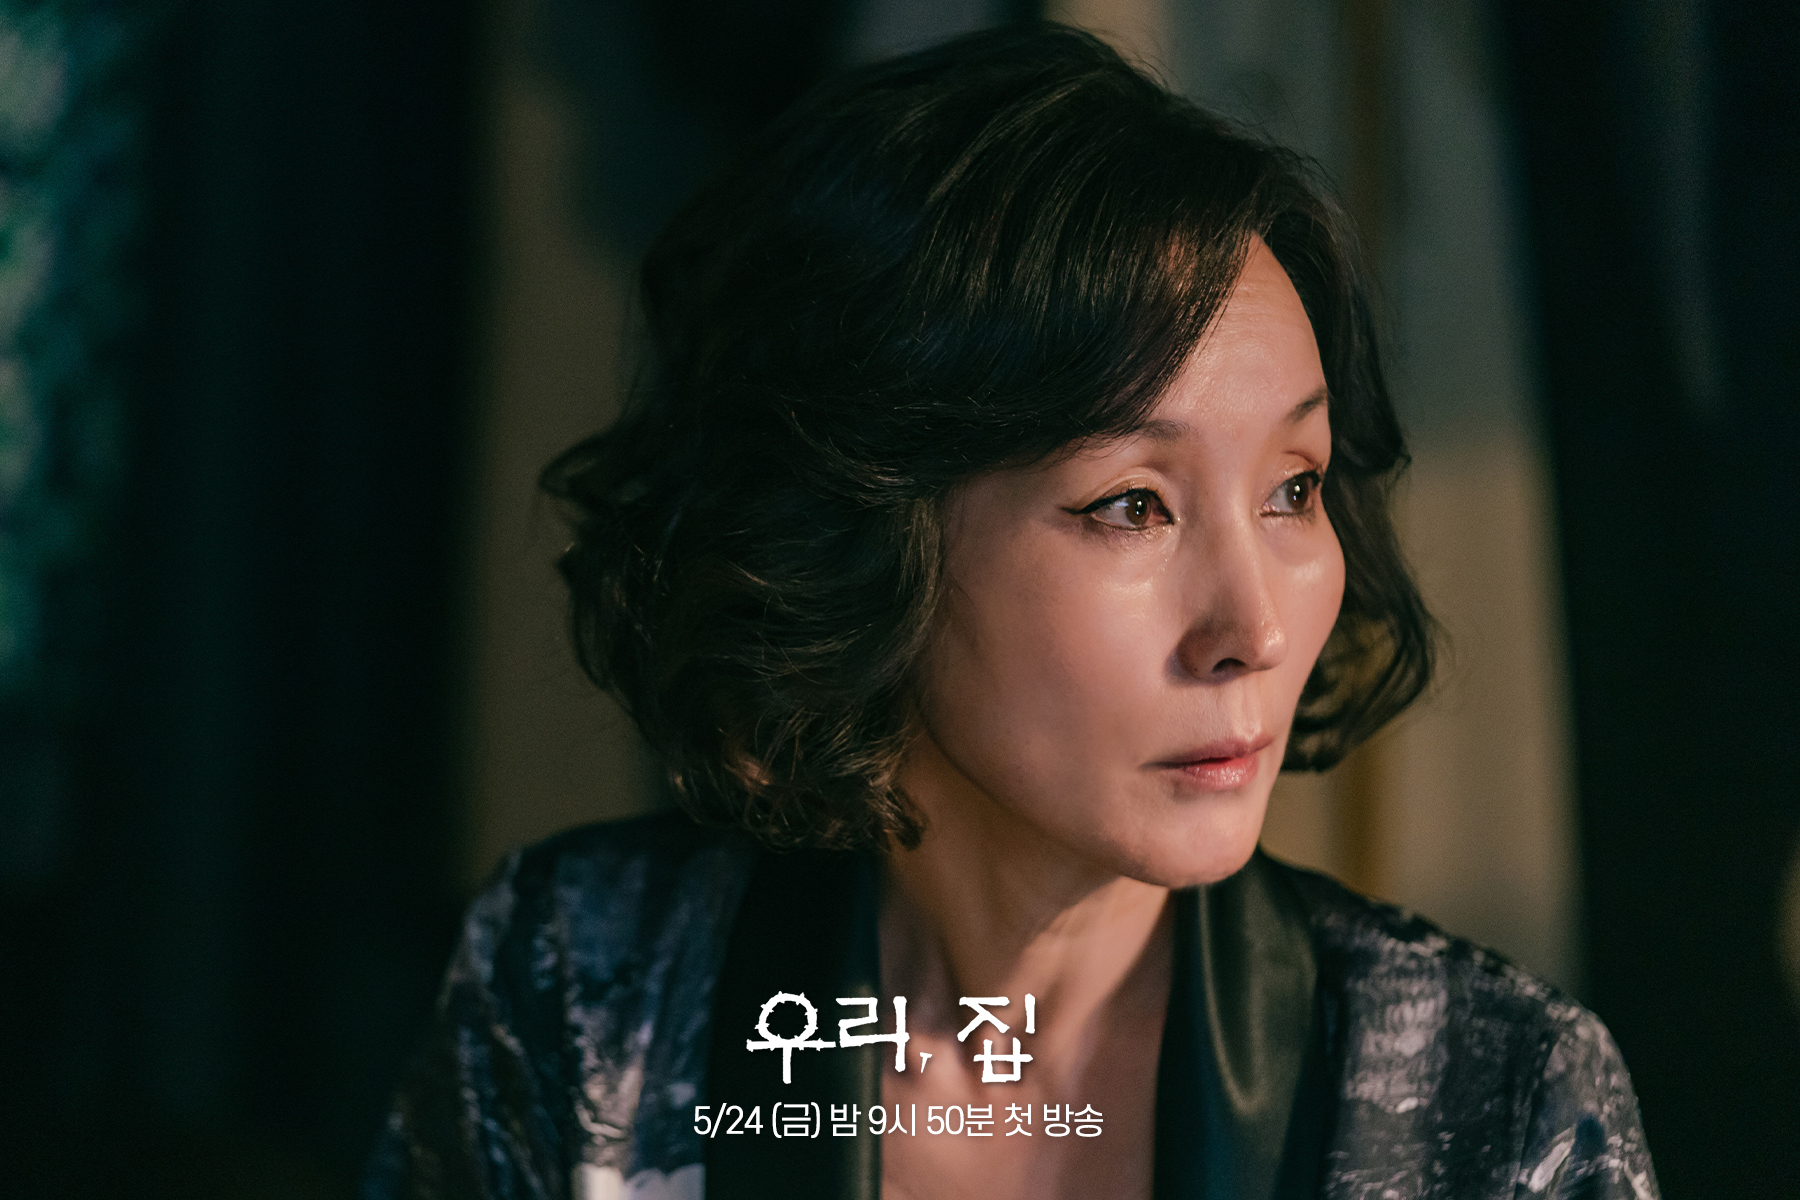 Lee Hye Young And Kim Hee Sun Show Intense Chemistry In 